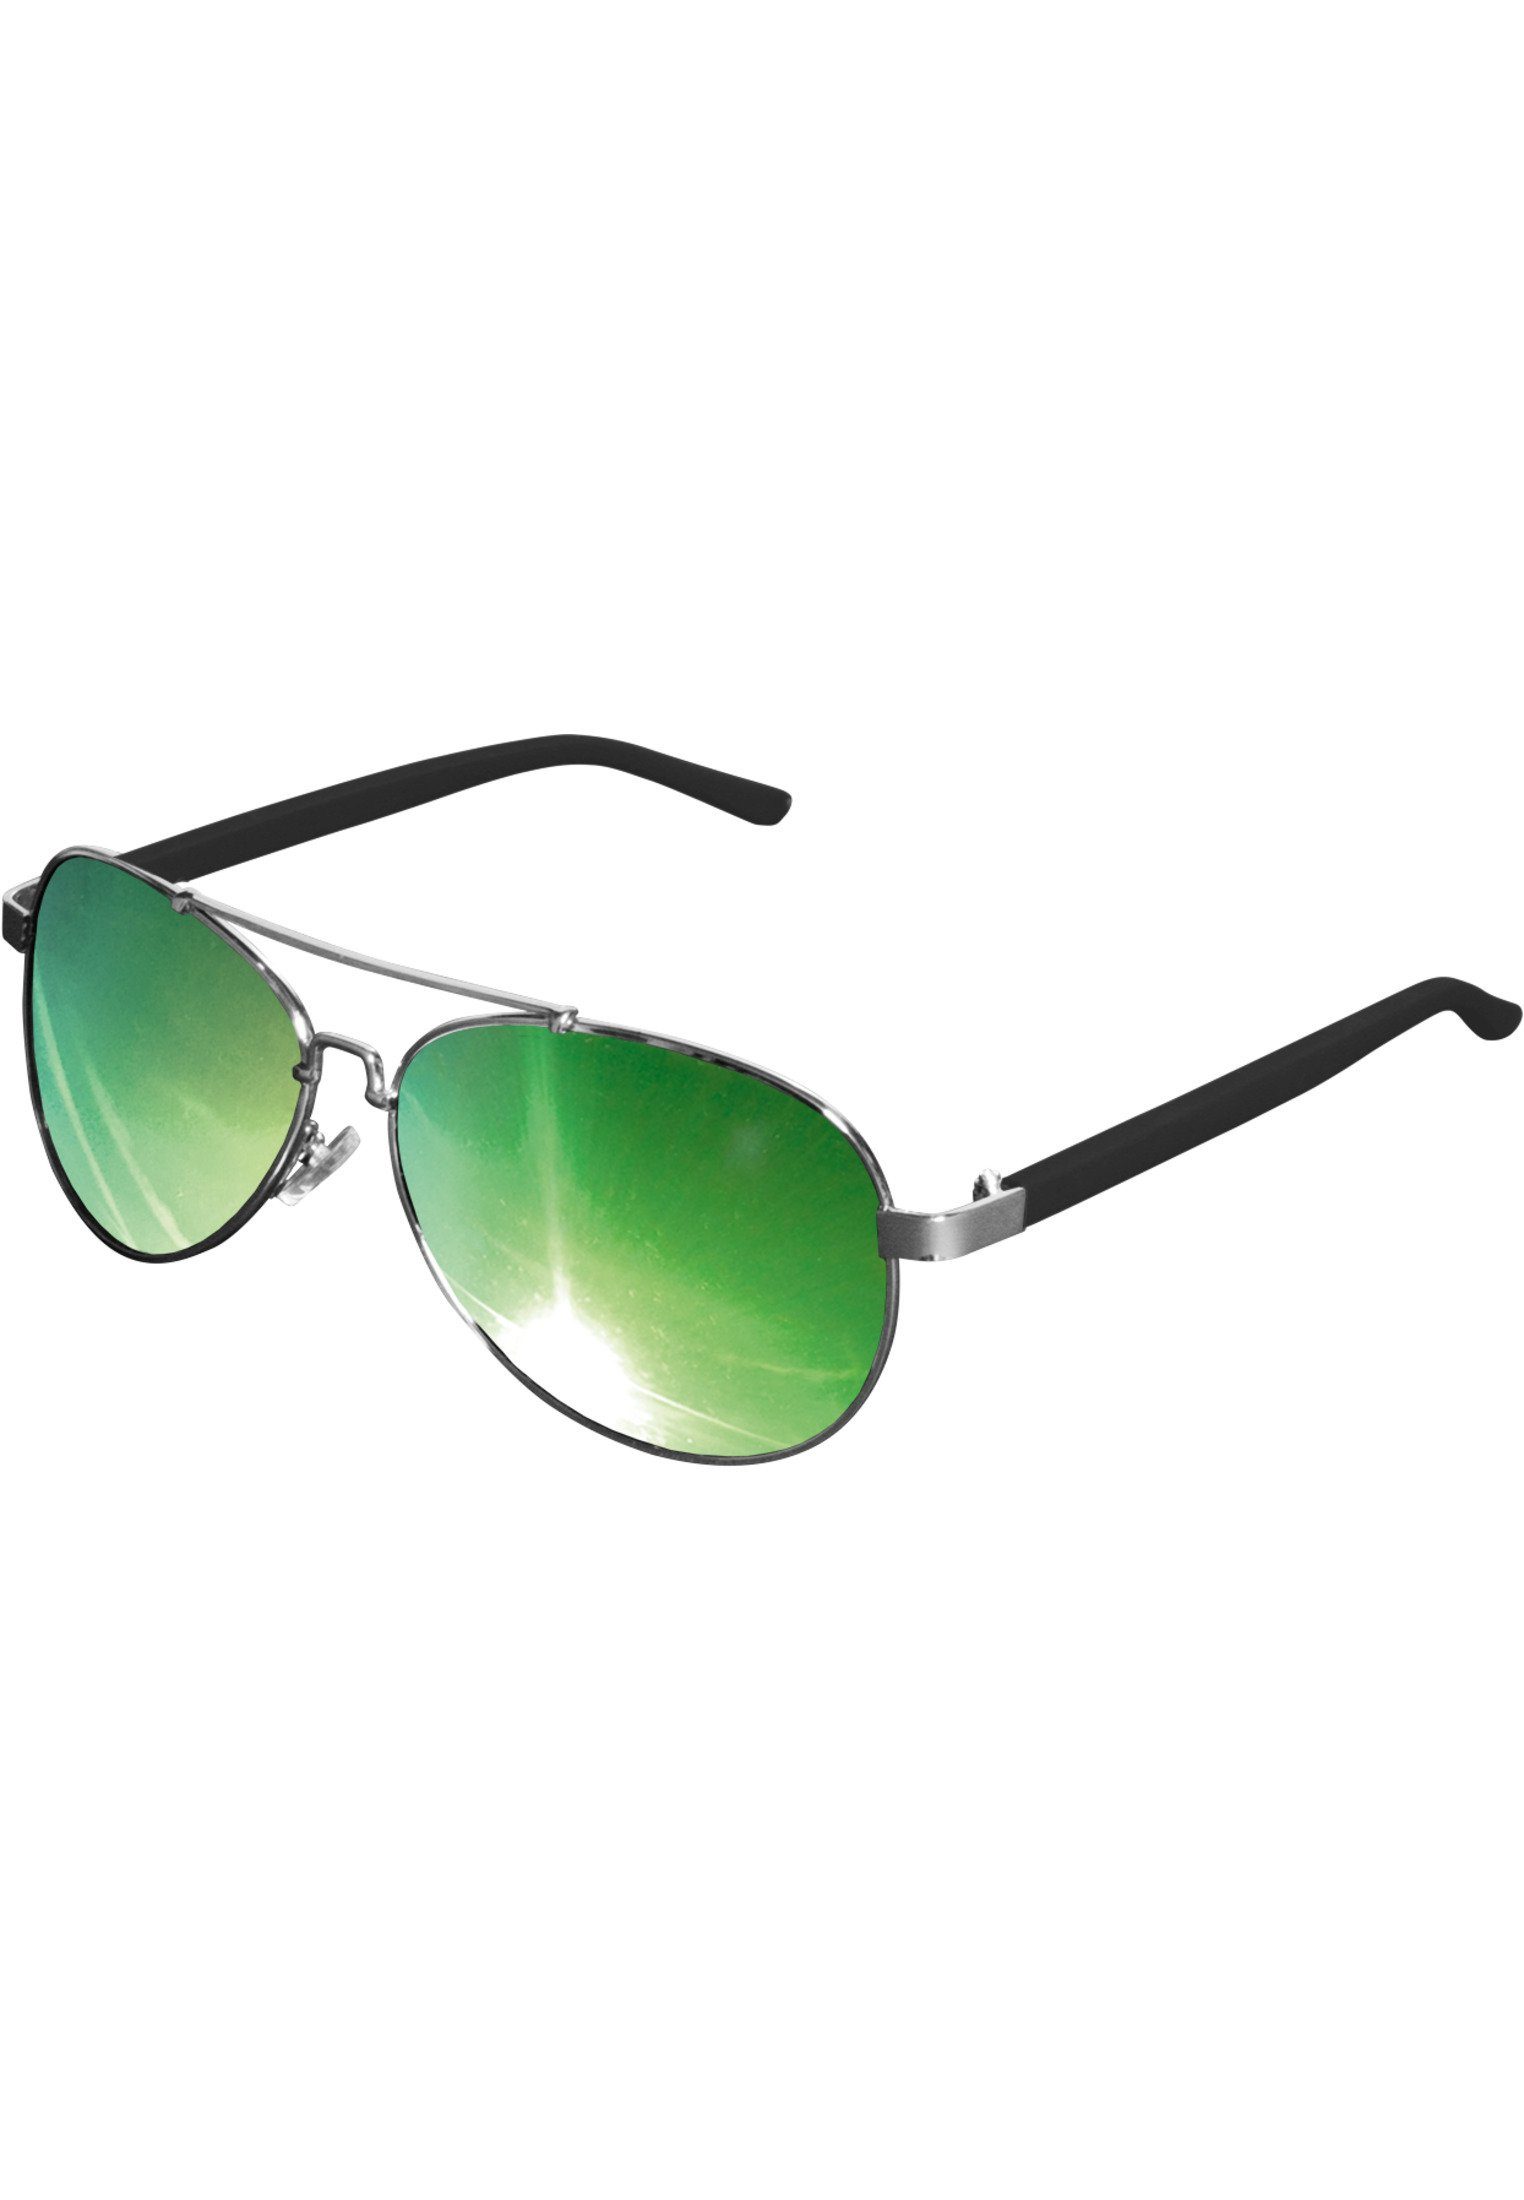 silver/green Accessoires Sonnenbrille MSTRDS Sunglasses Mirror Mumbo